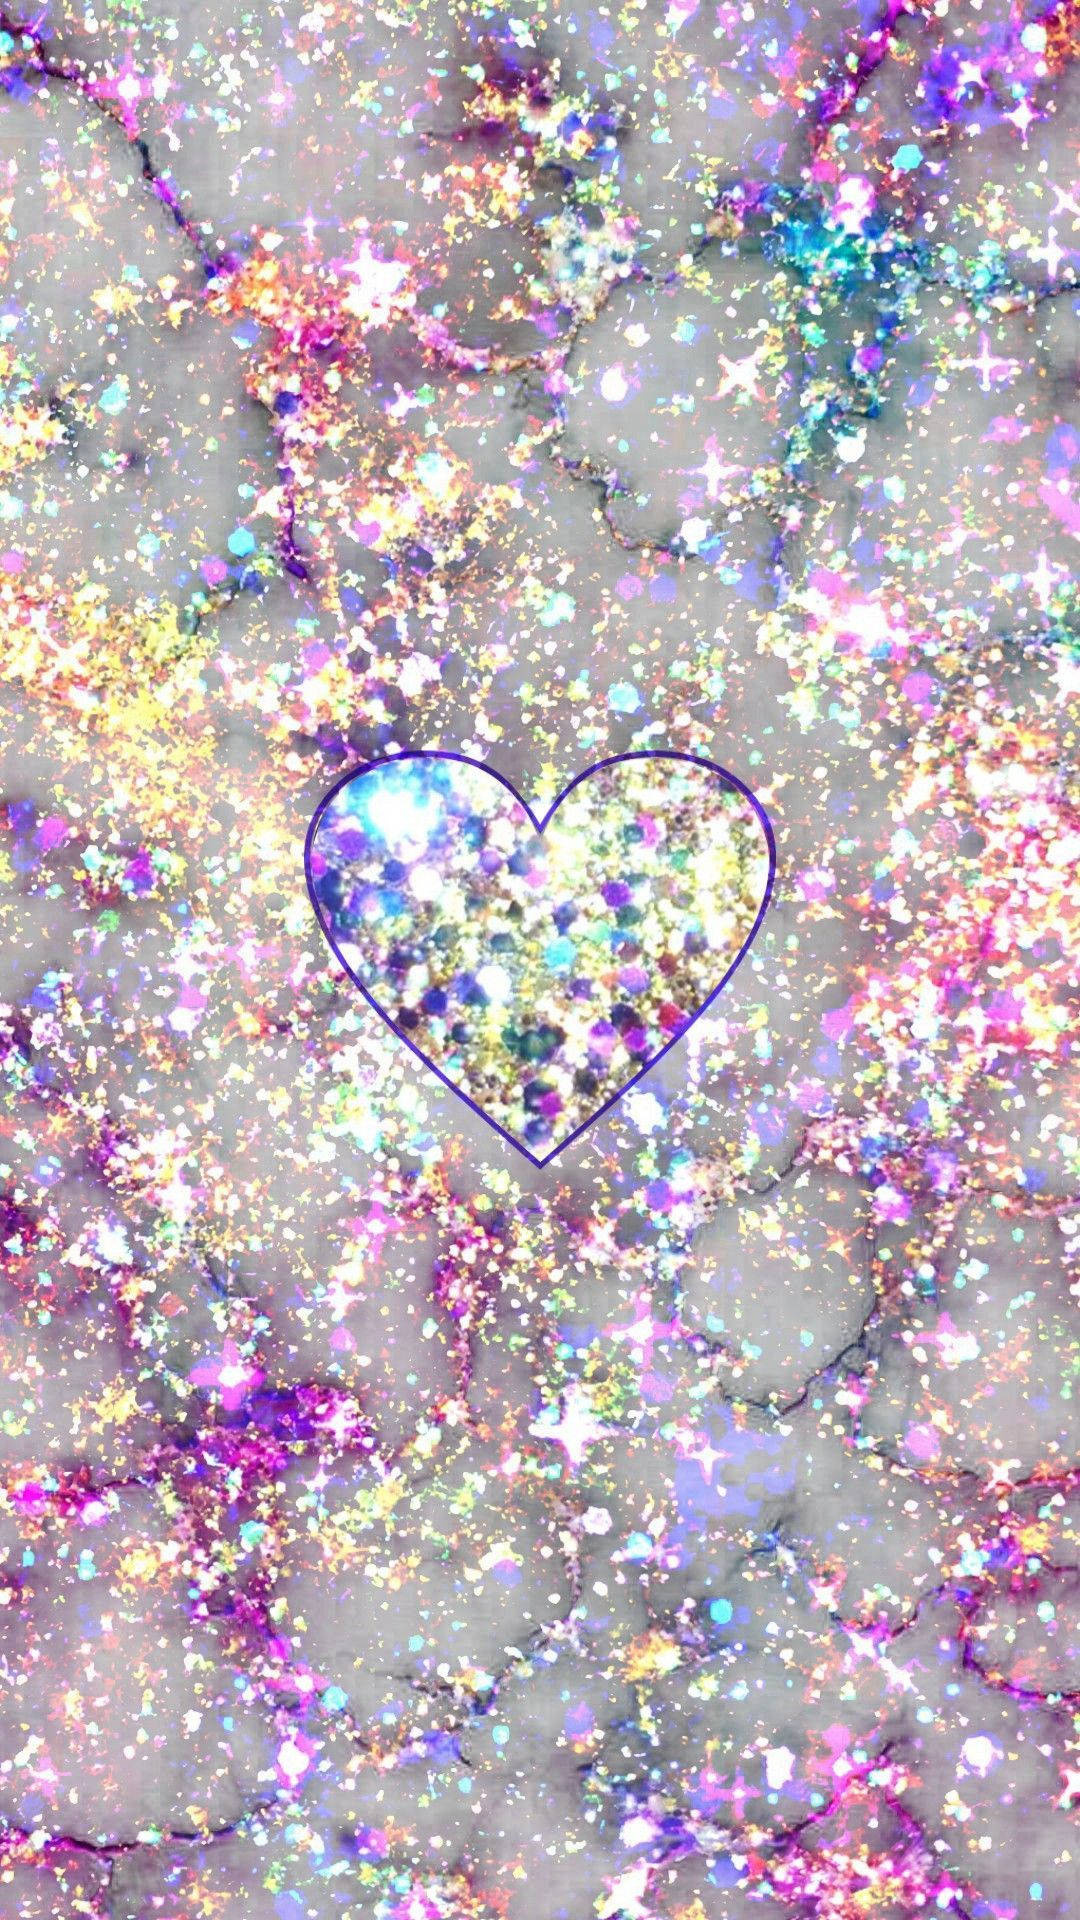 Sparkly Glitters With Heart Overlay Wallpaper